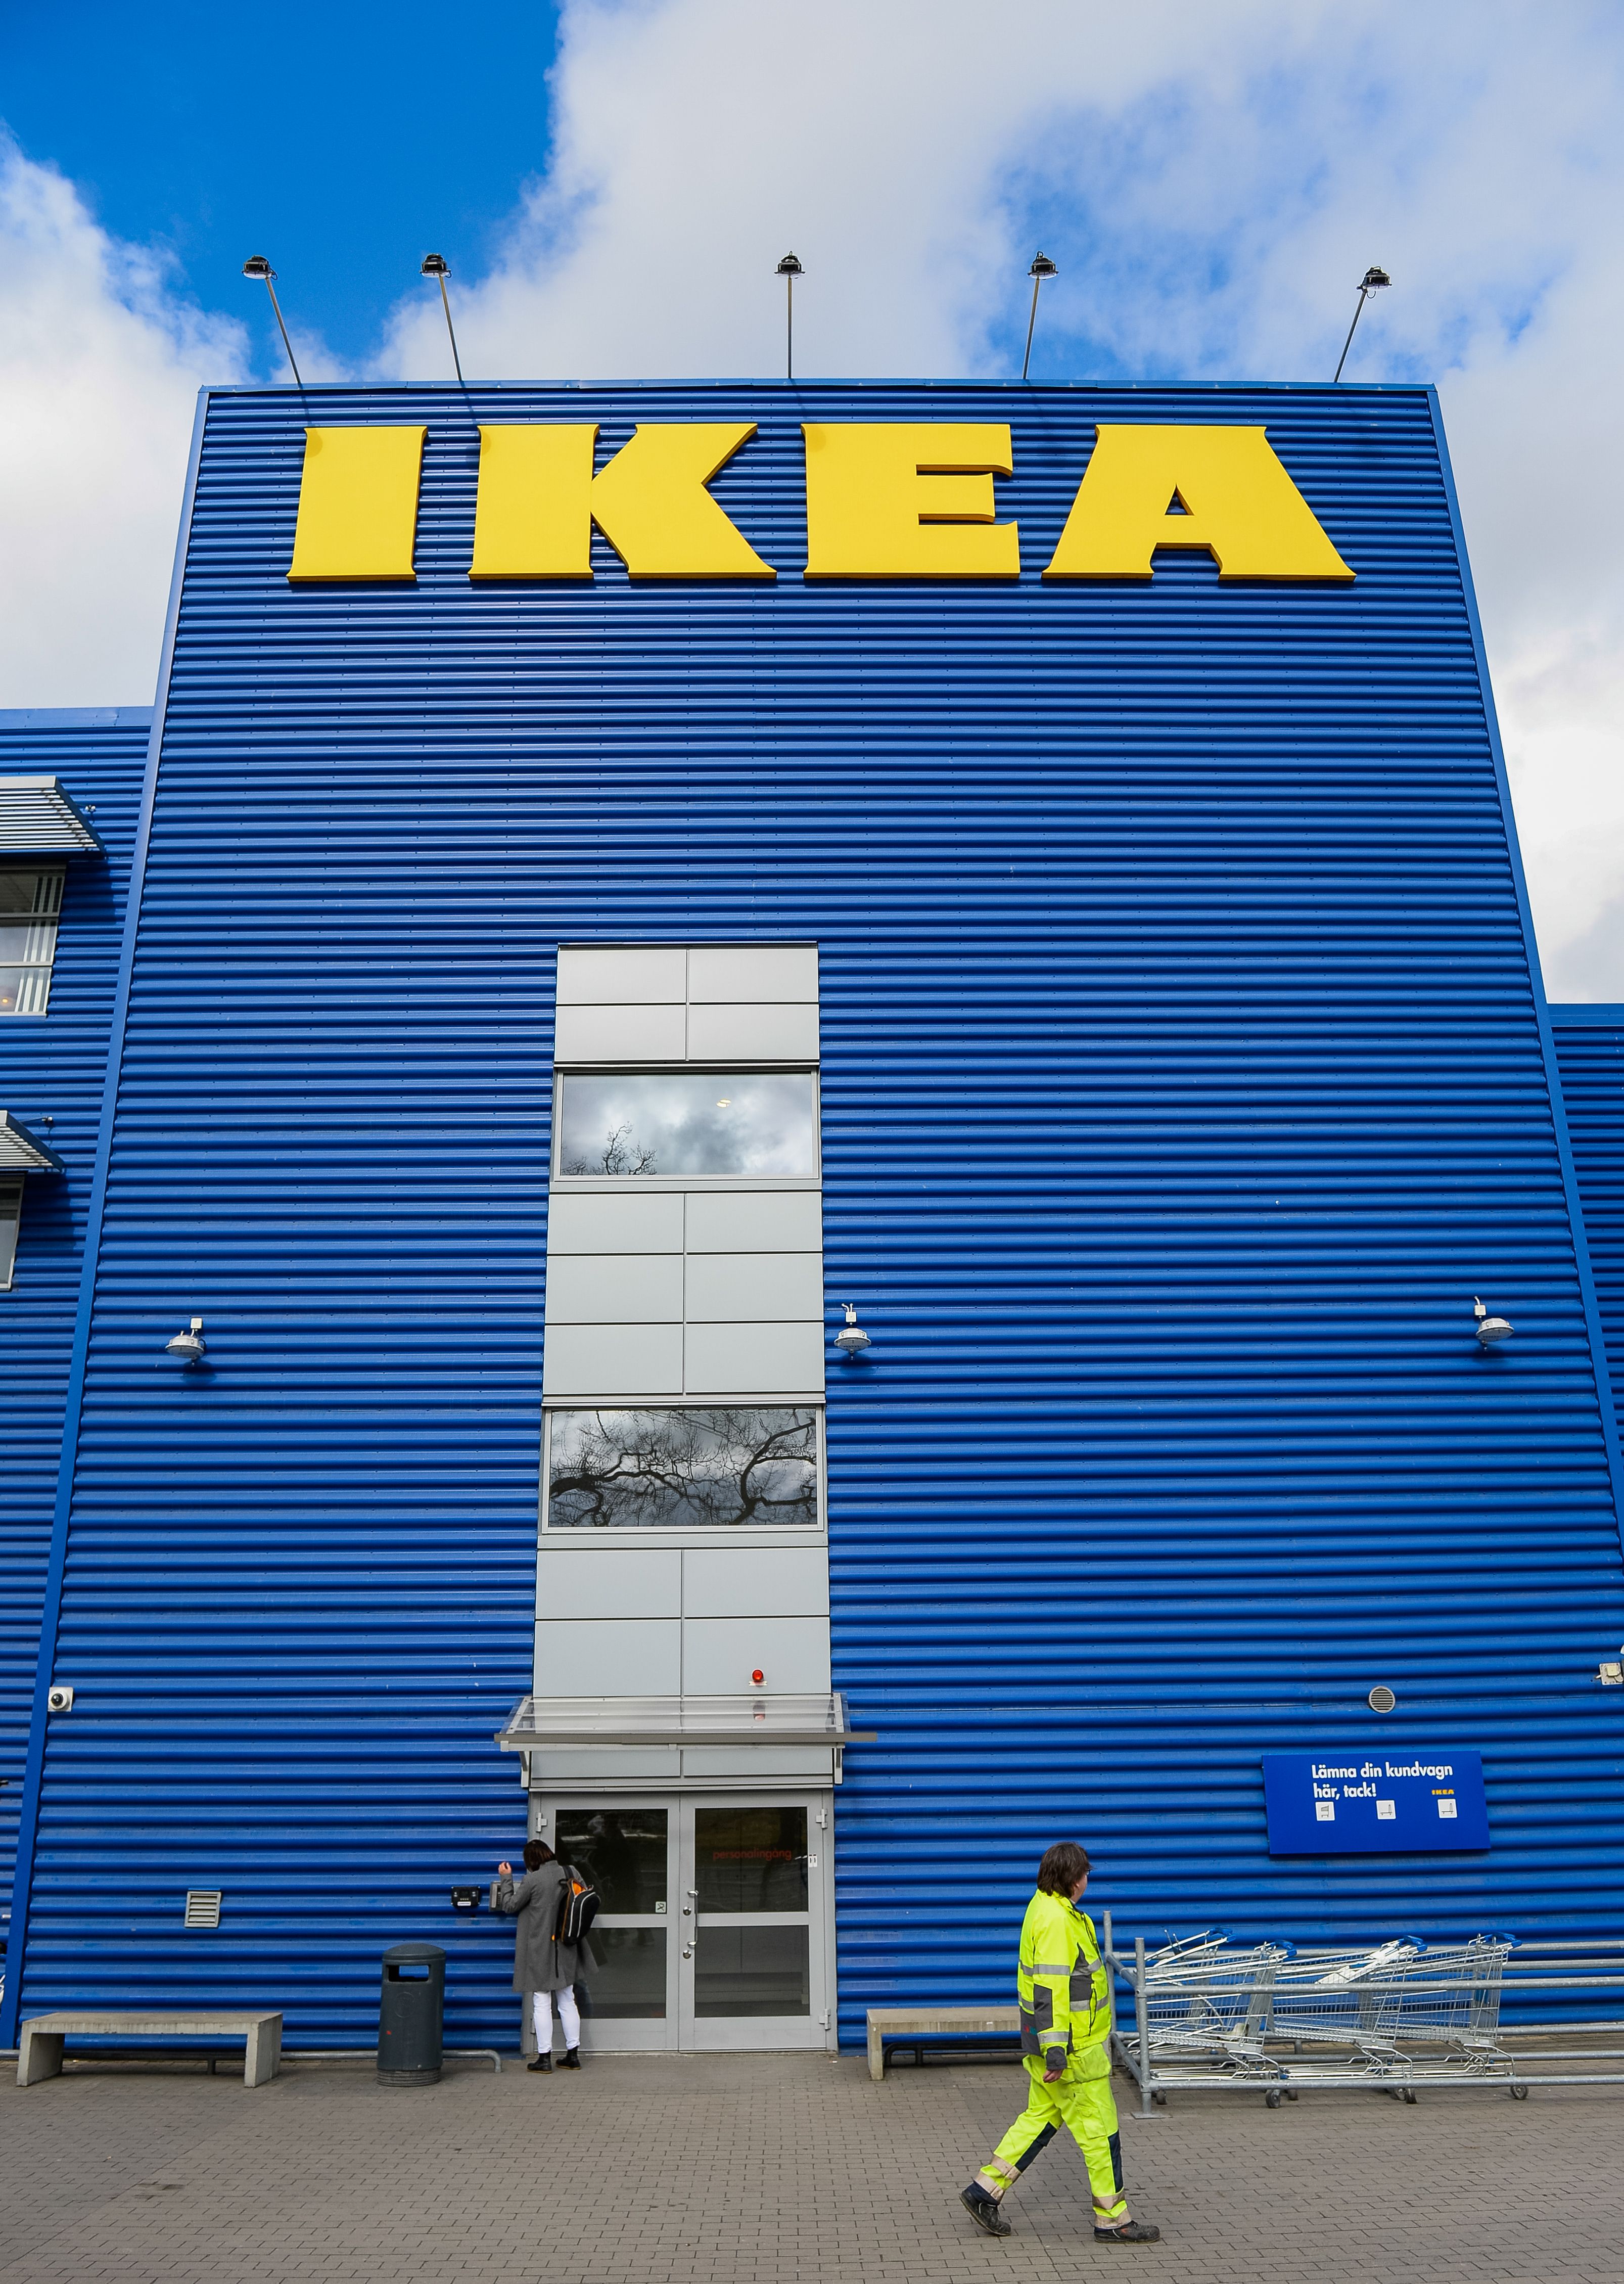 Europe's biggest Ikea store in Kungens Kurva, south-west of Stockholm, Sweden. Courtesy of Getty Images.